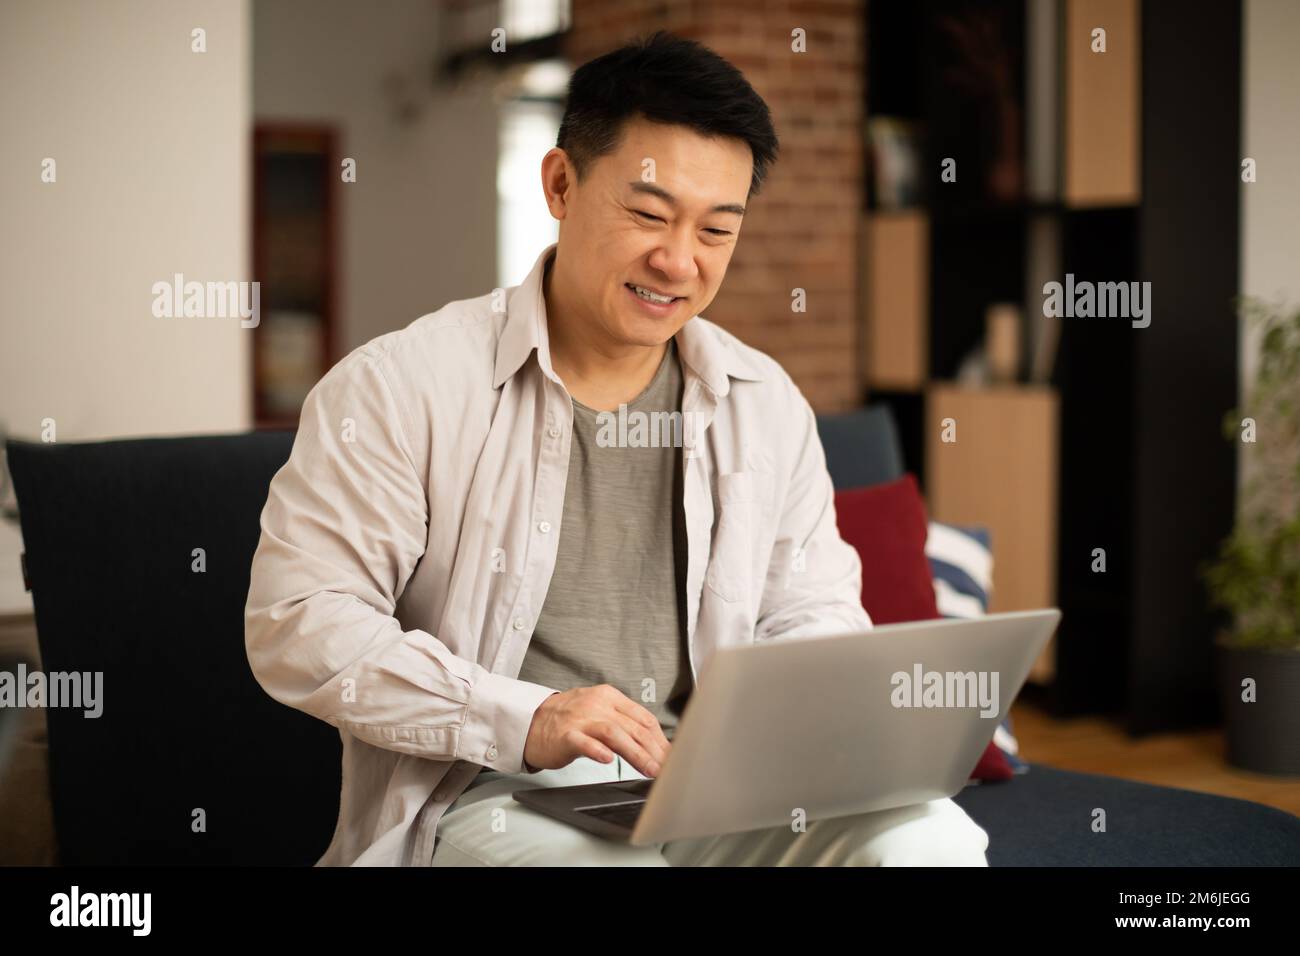 Happy asian middle aged man working on laptop, sitting on sofa in living room interior, free space Stock Photo